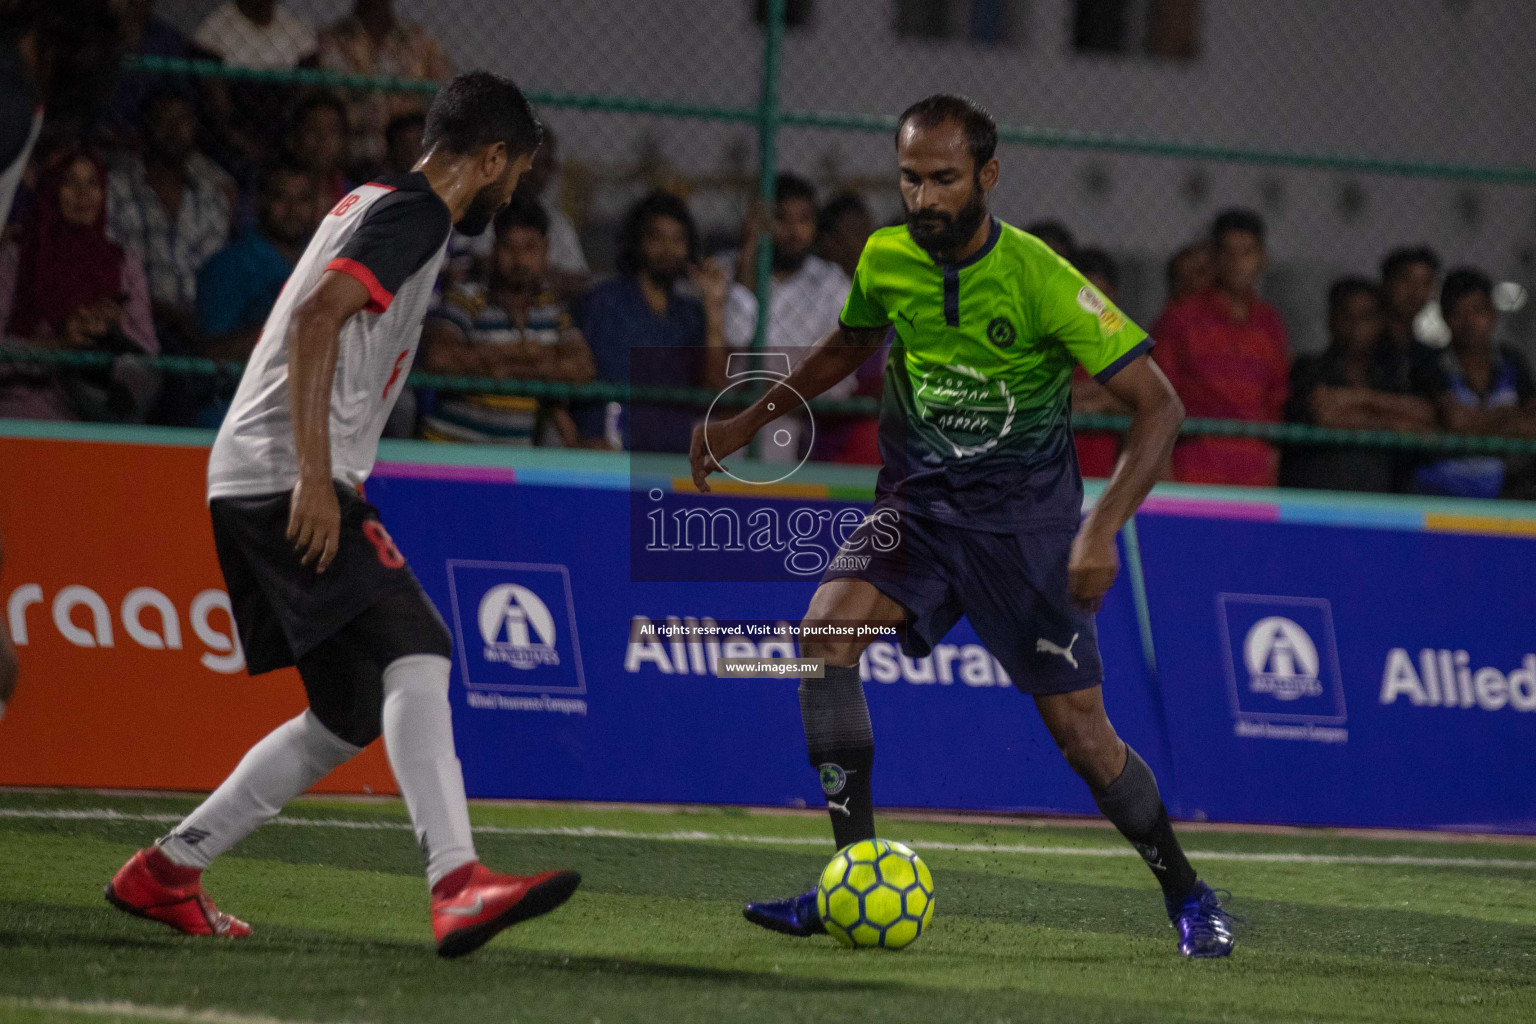 Quarterfinals of Club Maldives Cup 2019 on 28th April 2019, held in Hulhumale. Photos: Shuadhu Abdul Sattar / images.mv